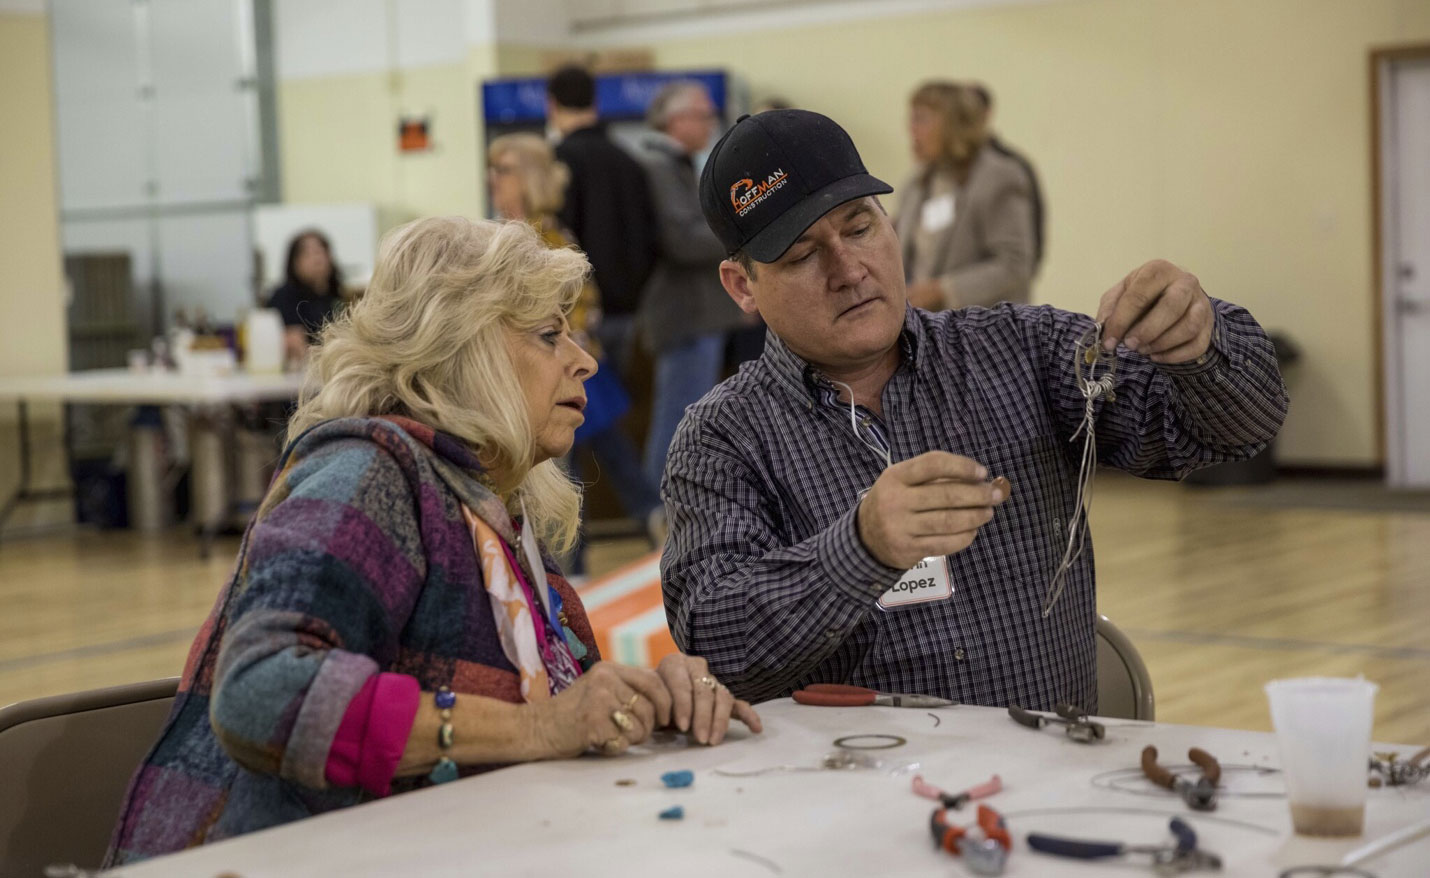 A male conference attendee in a black cap constructing a homemade dream catcher. A woman sitting next to him is closely watching.